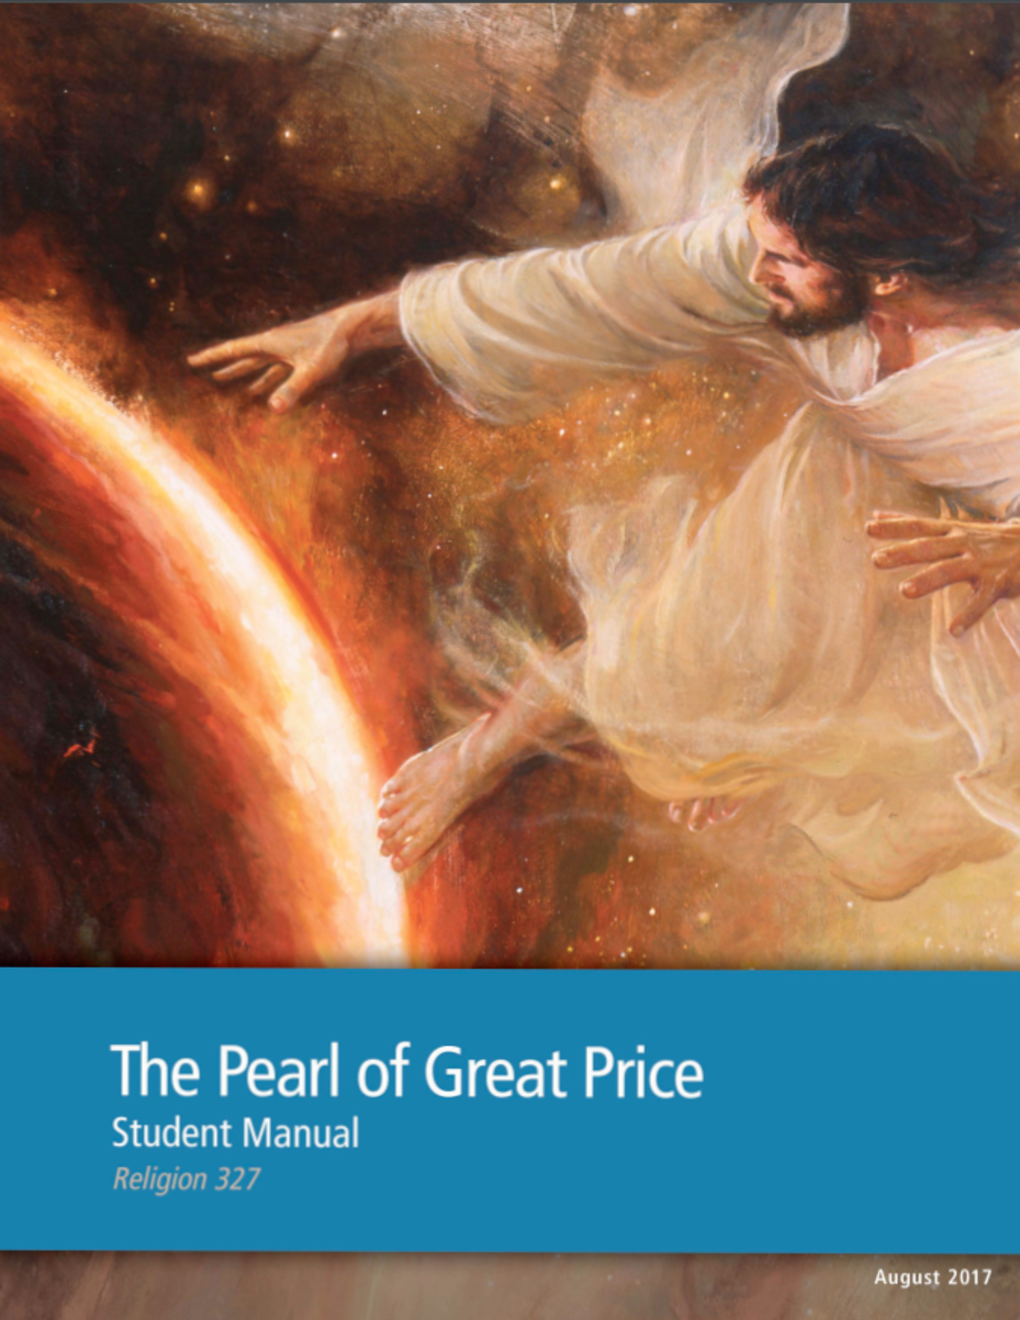 The Pearl of Great Price Student Manual (Rel 327)